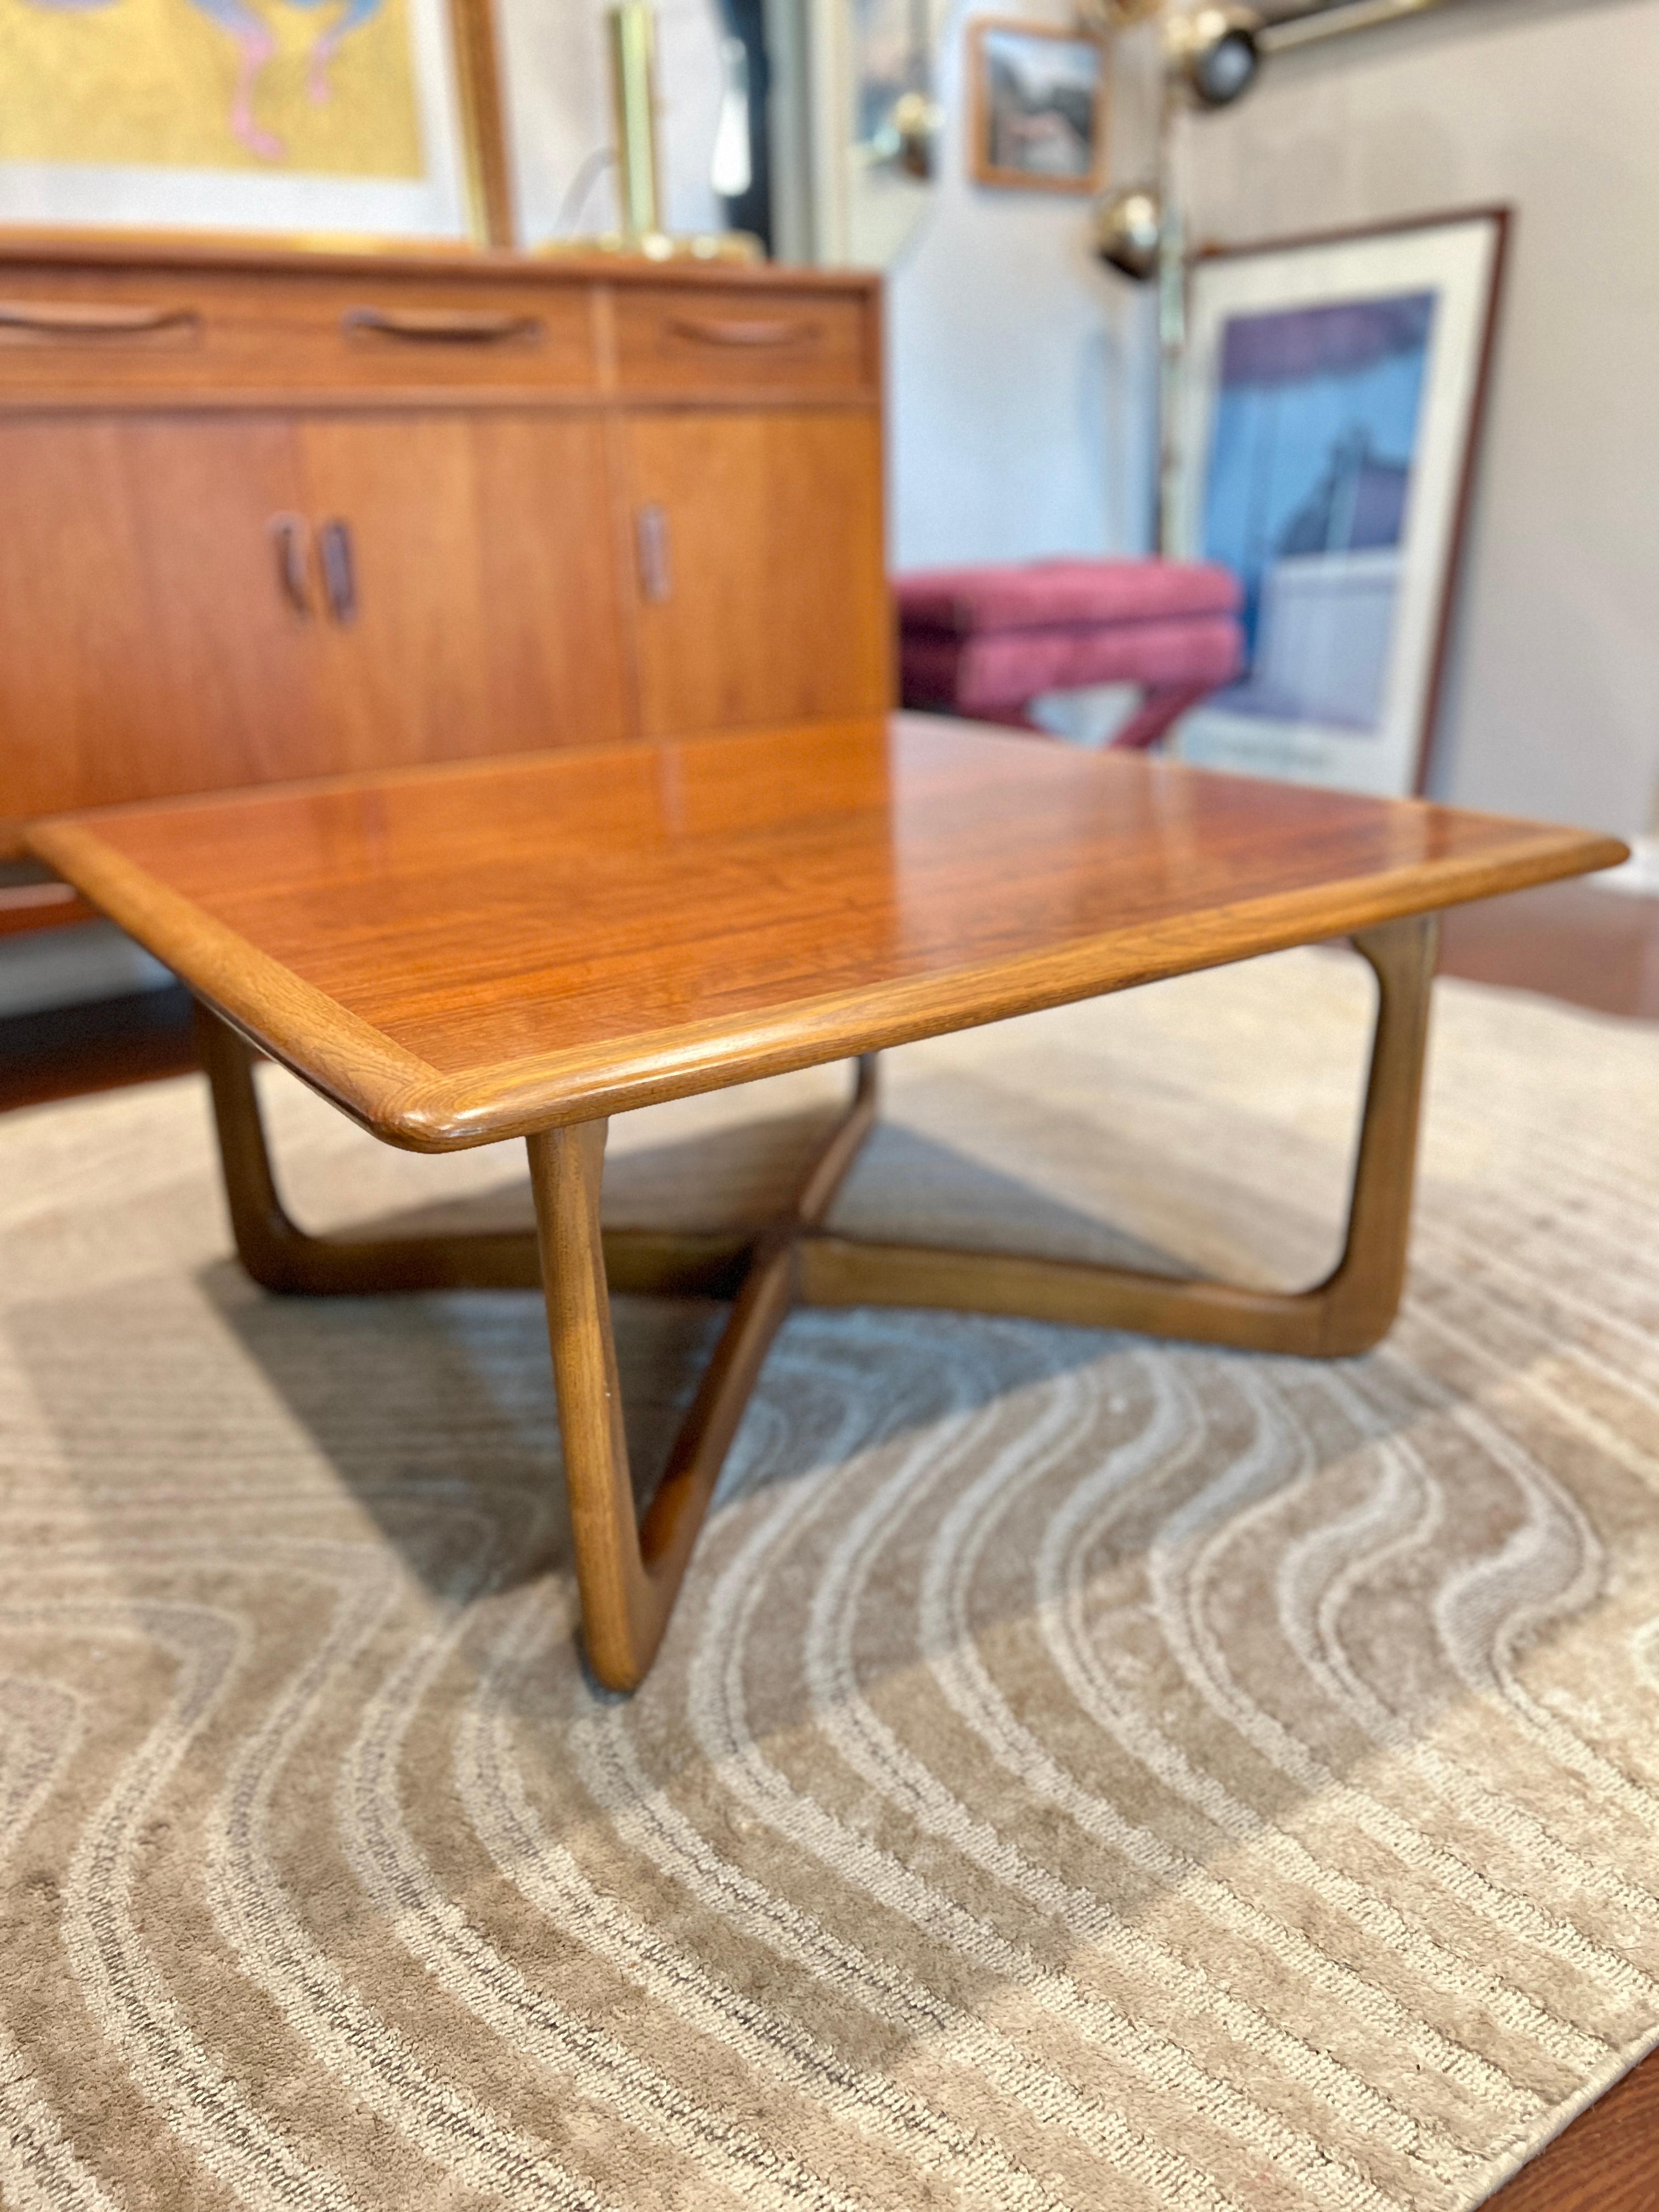 Oak A mid century modern oak coffee table by Lane. Part of perception collection 